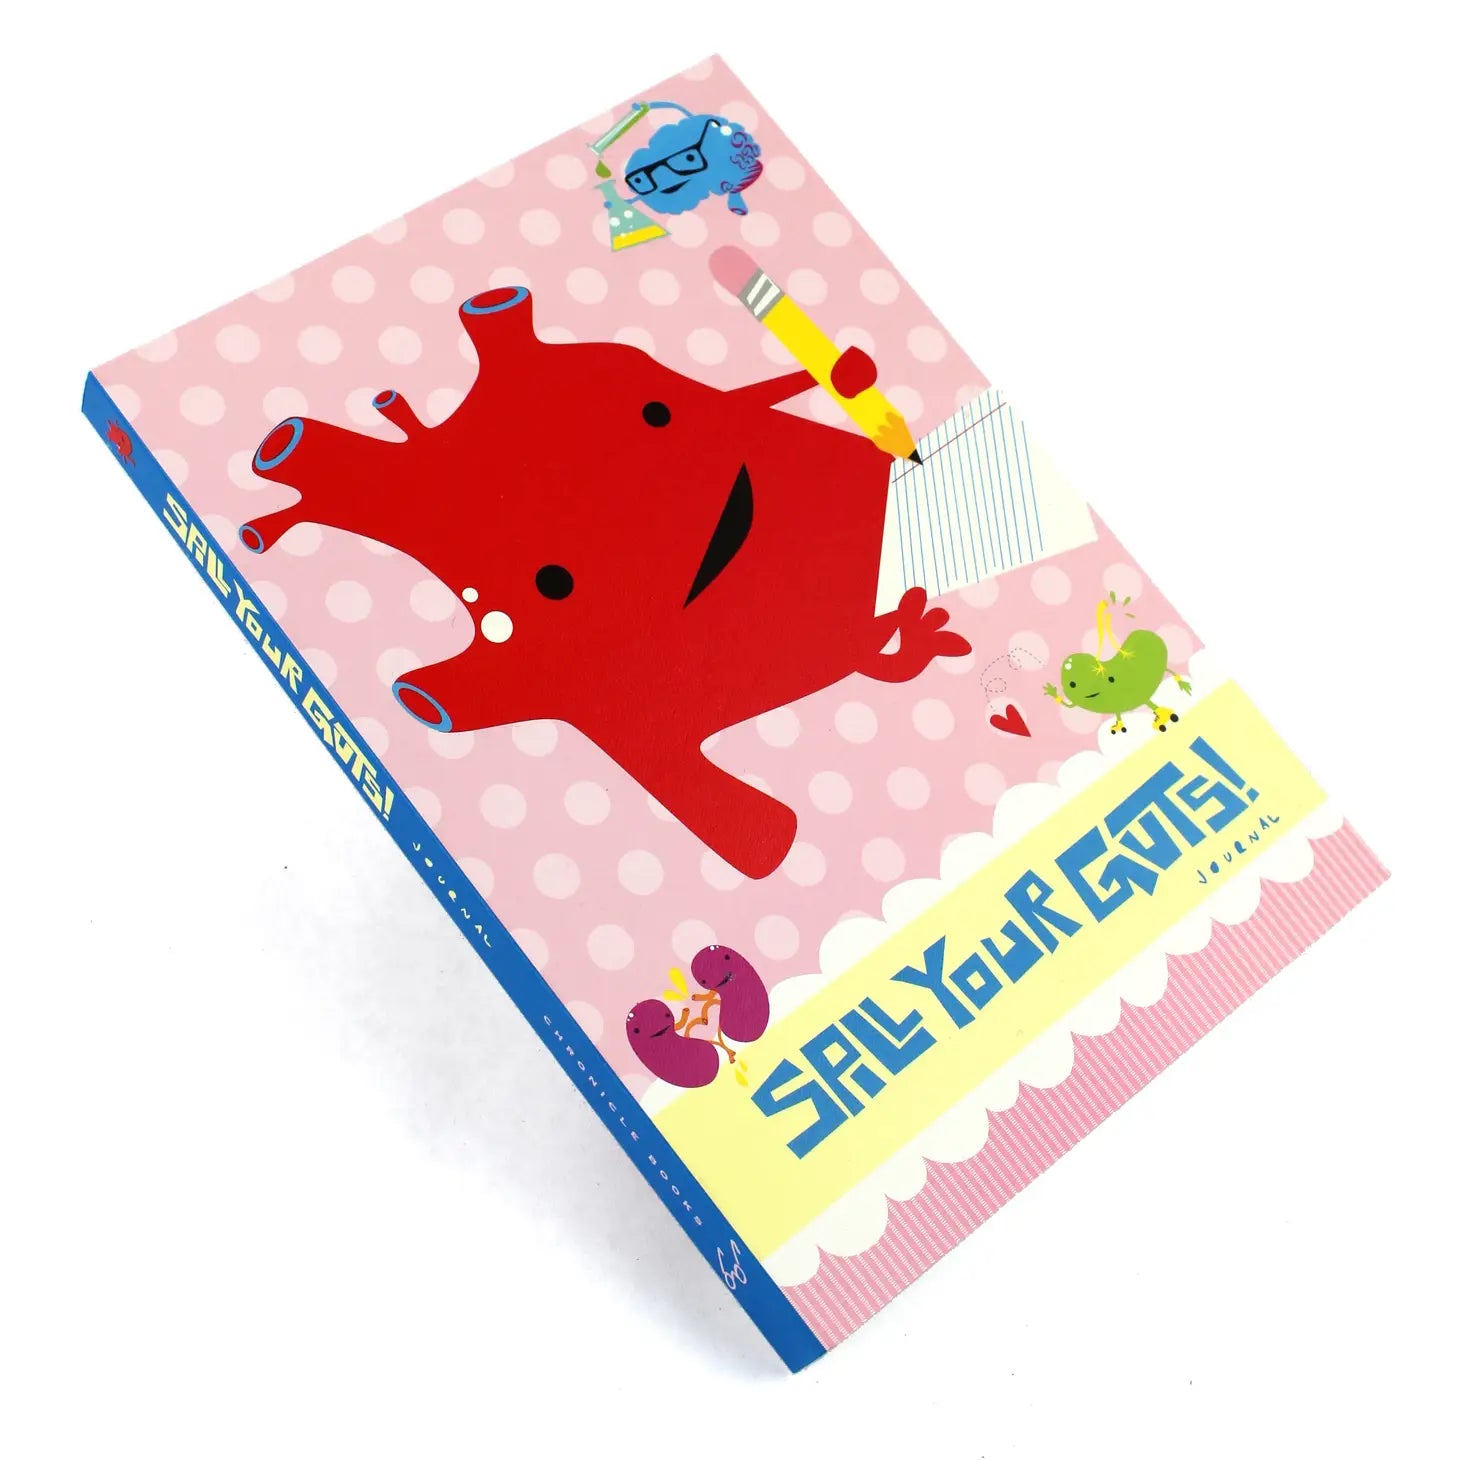 Softcover notebook "Spill your guts"